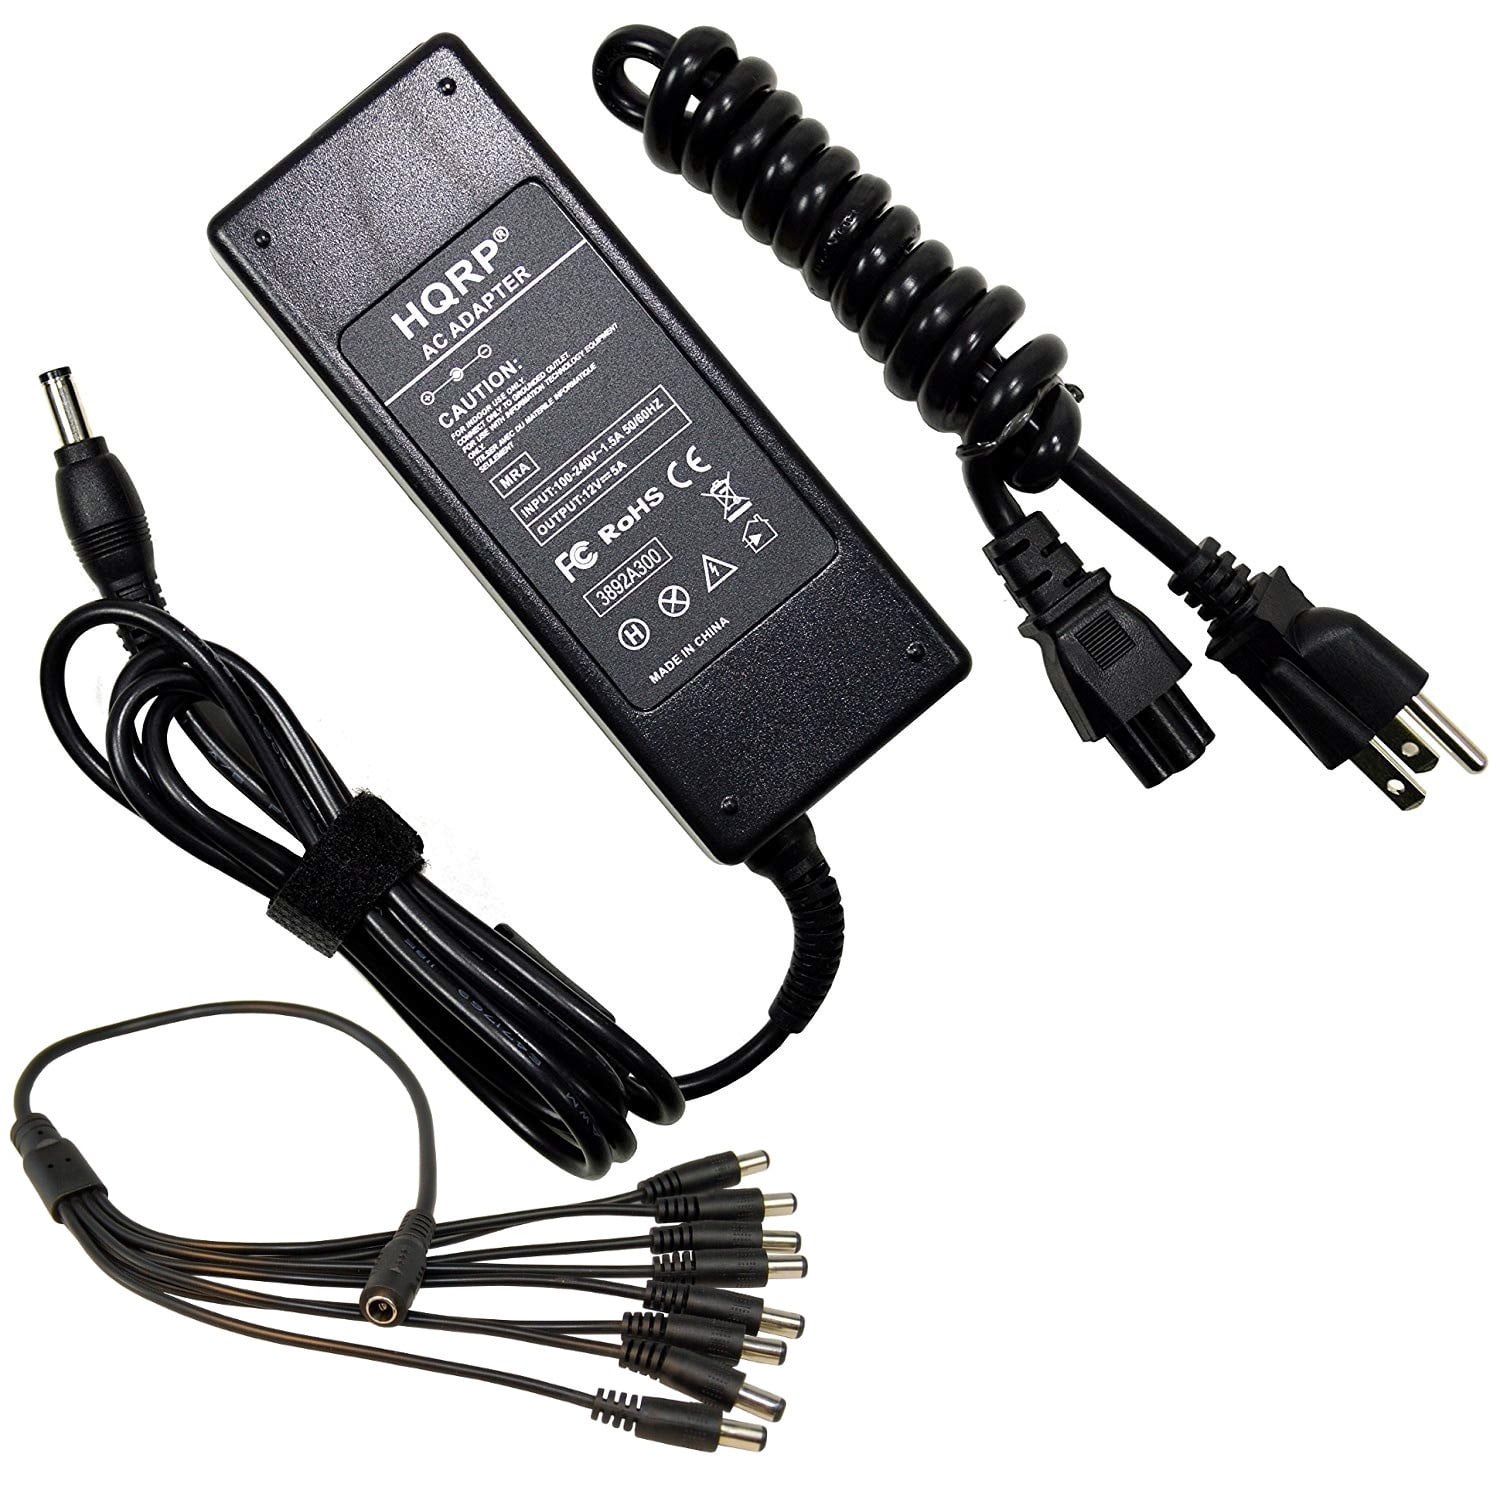 2000mA 12VDC 2Amp For Two 4K & Regular Security Camera Power Supply Adapter 